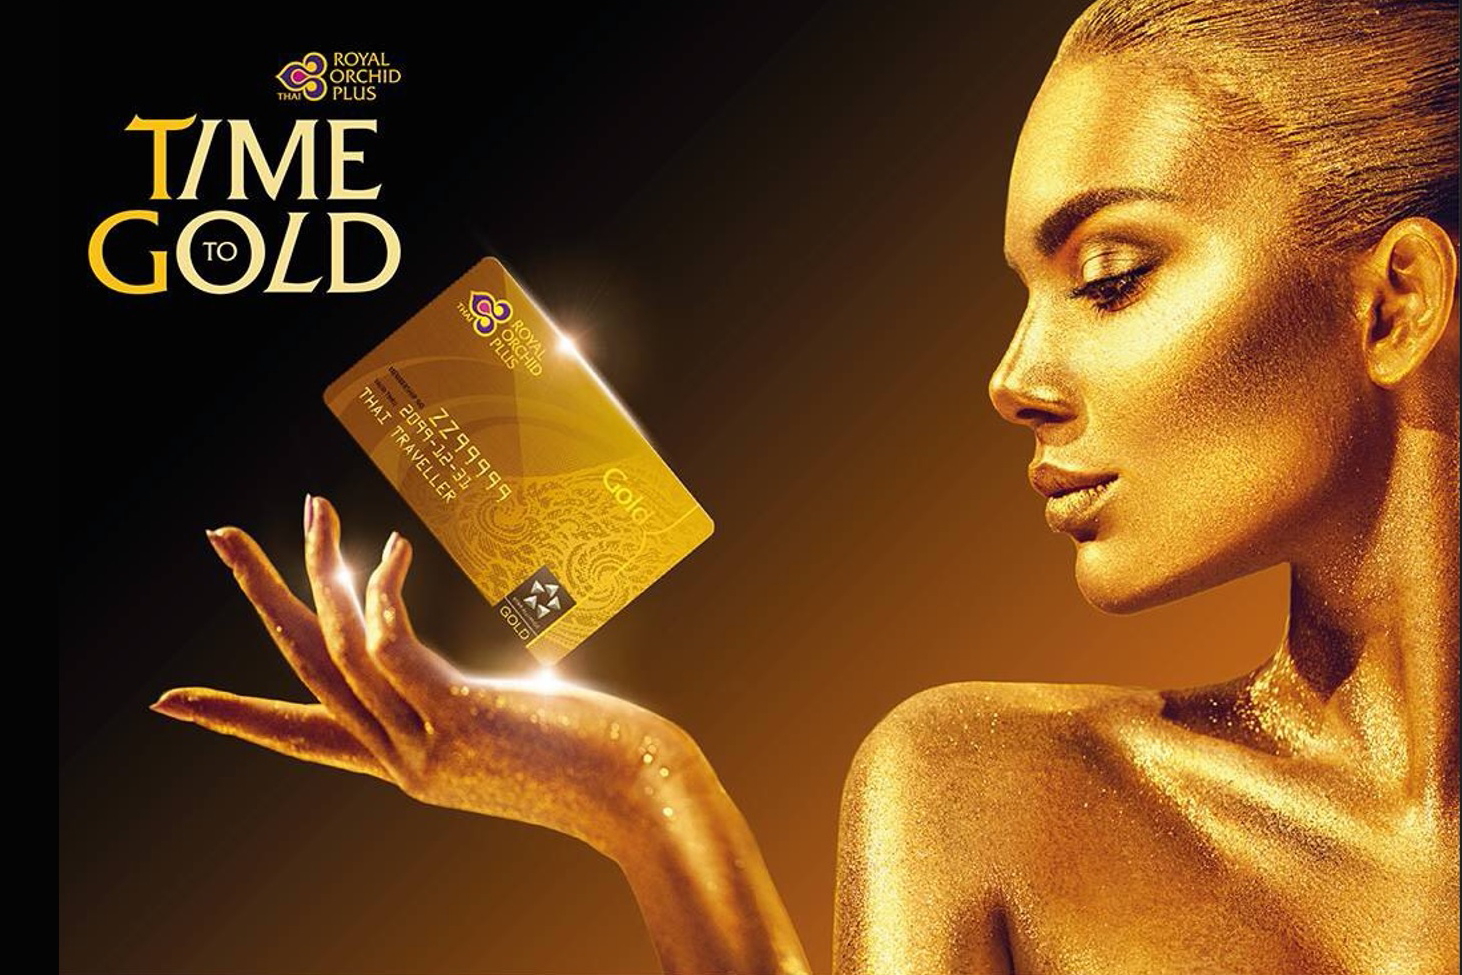 Thai Airways has launched a promotion that includes Gold status in the airline's frequent flyer programme, Royal Orchid Plus (ROP). Click to enlarge.